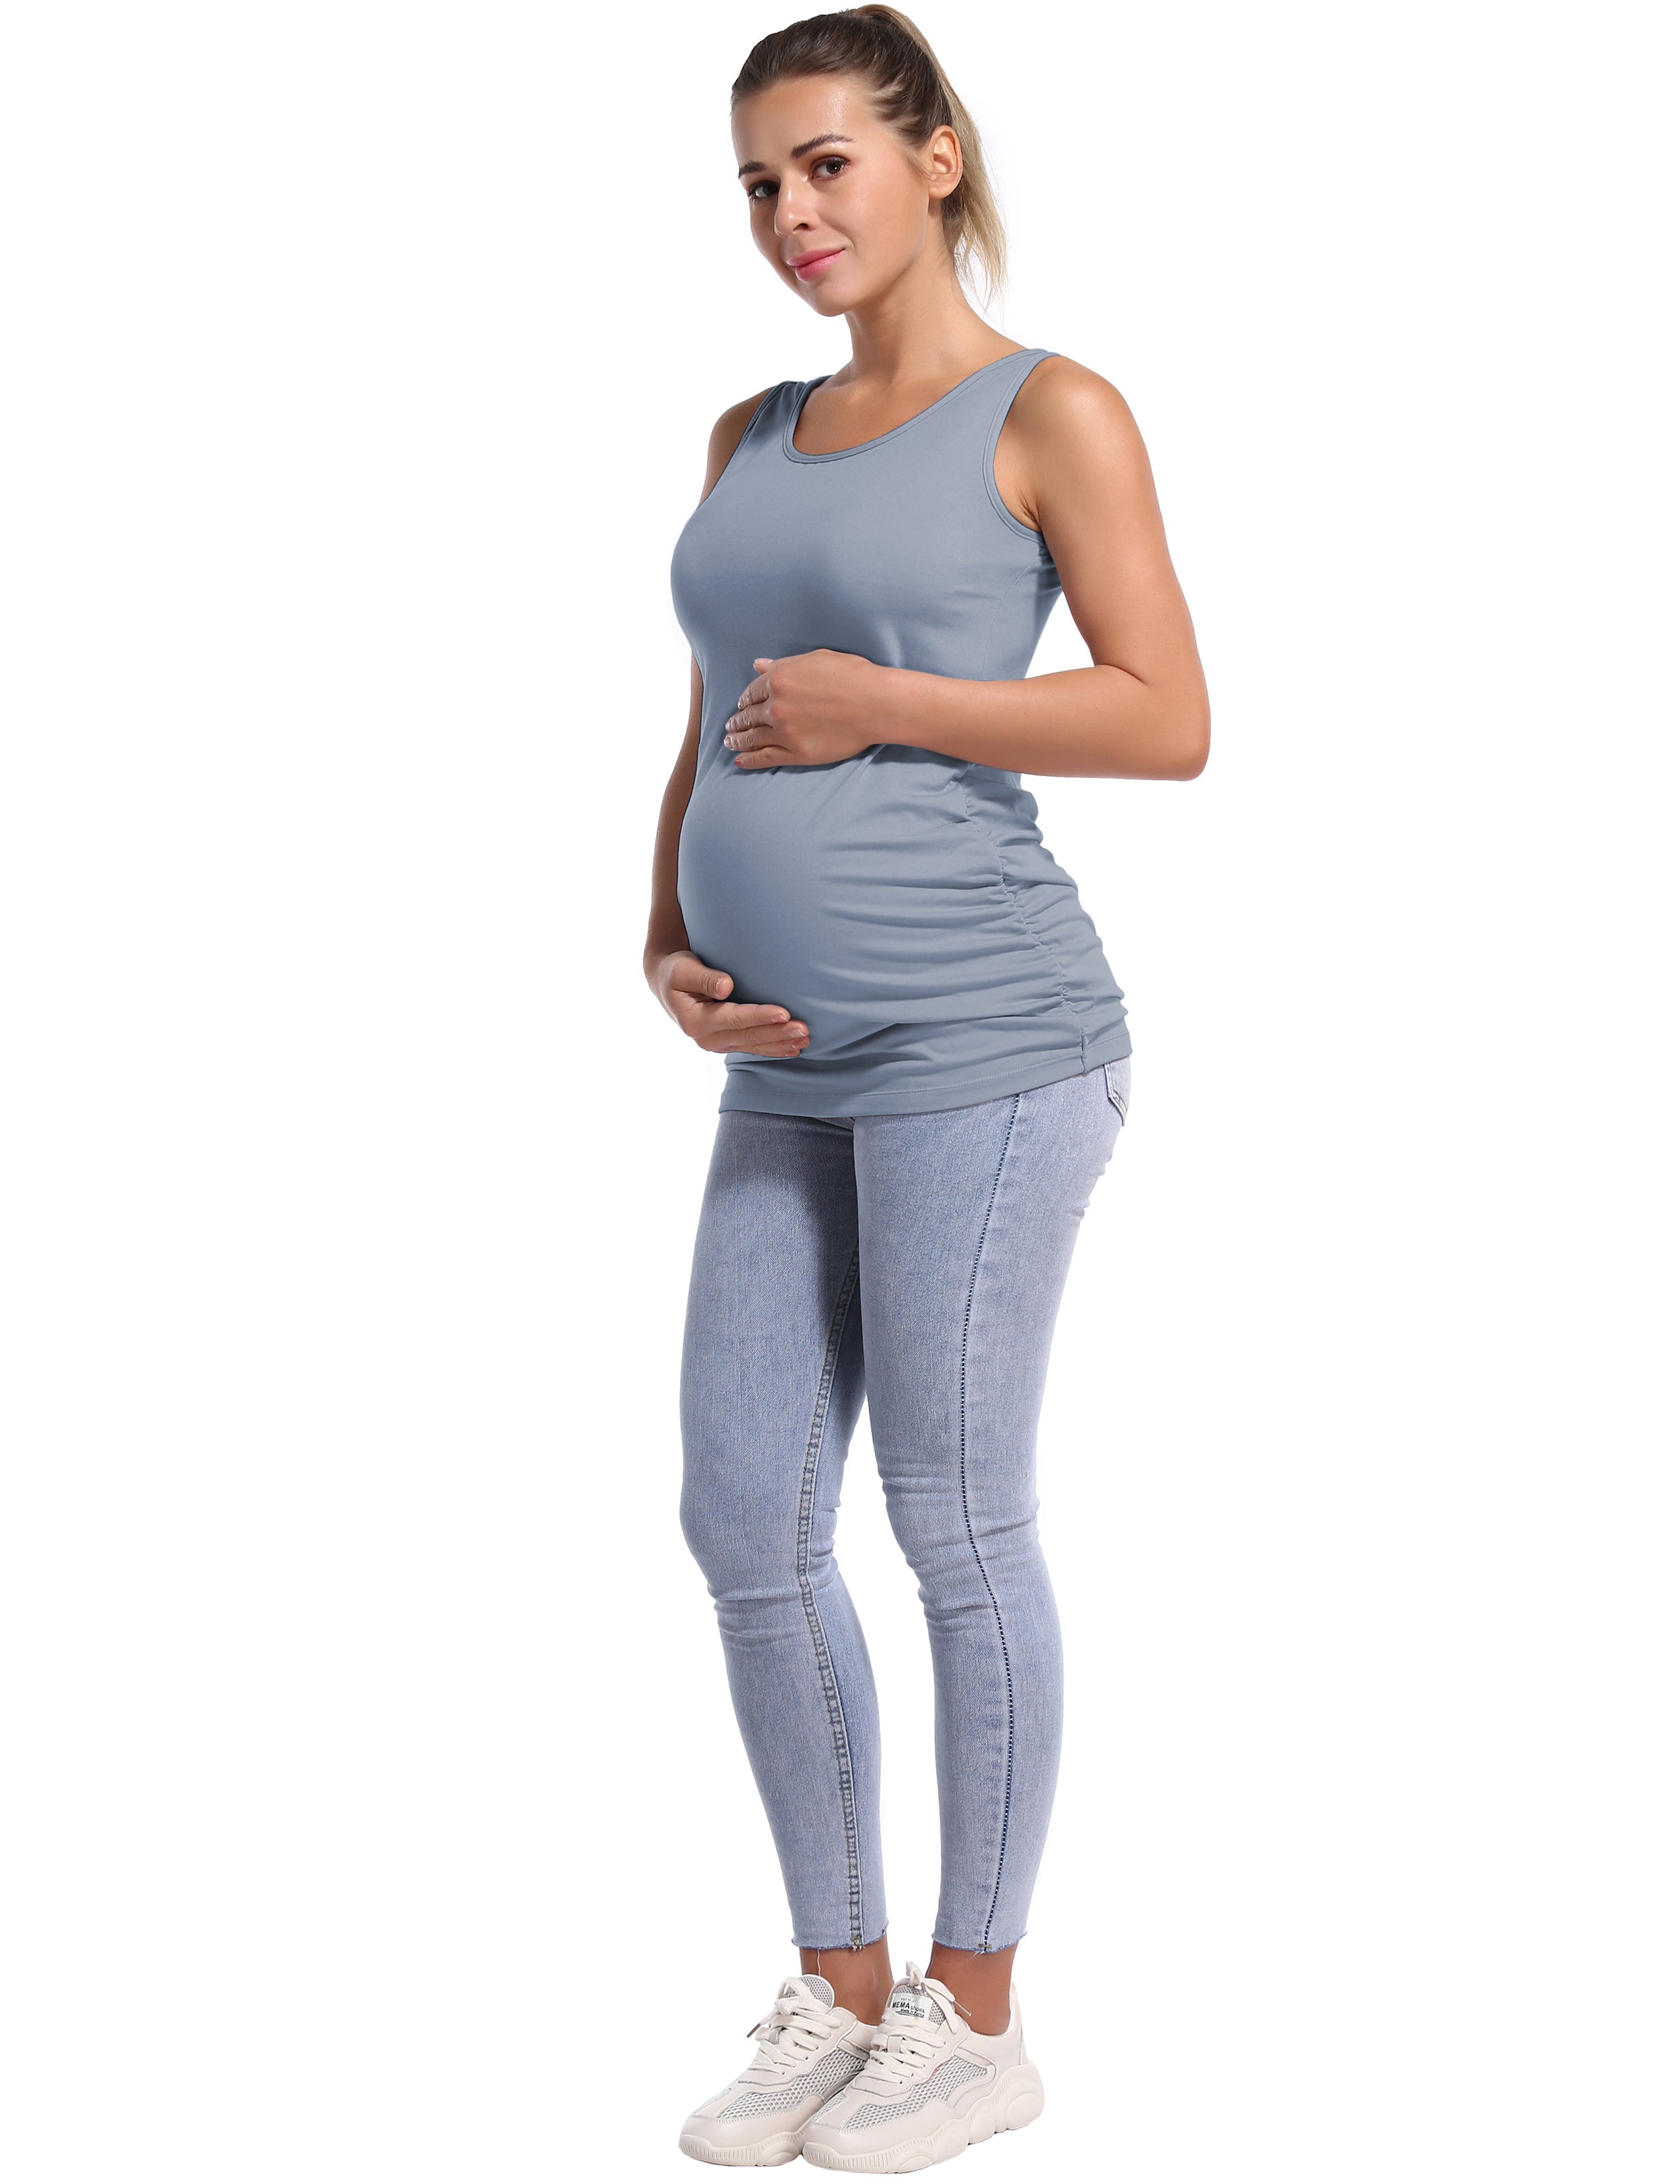 Maternity Side Shirred Tank Top heathergray 92%Nylon/8%Spandex(Cotton Soft) Designed for Maternity So buttery soft, it feels weightless Sweat-wicking Four-way stretch Breathable Contours your body